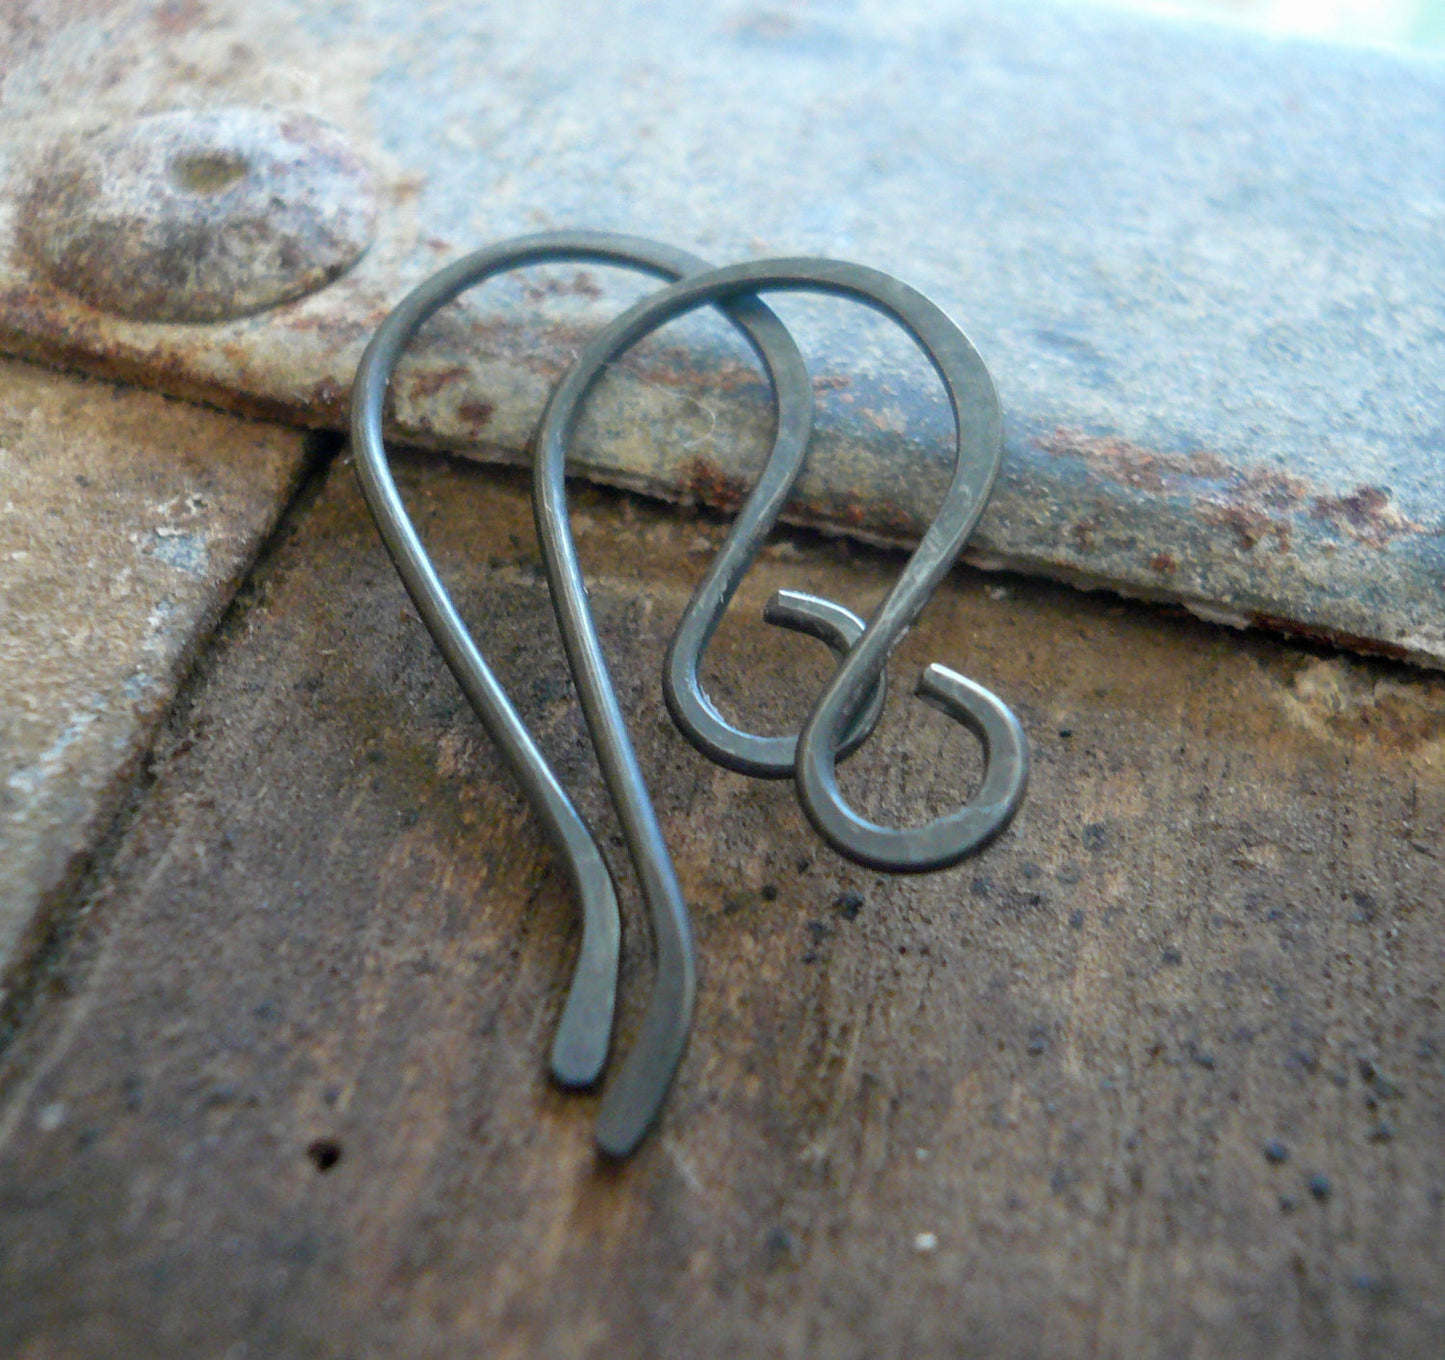 Dandy Sterling Silver Earwires - Handmade. Handforged. Heavily Oxidized. Made to Order